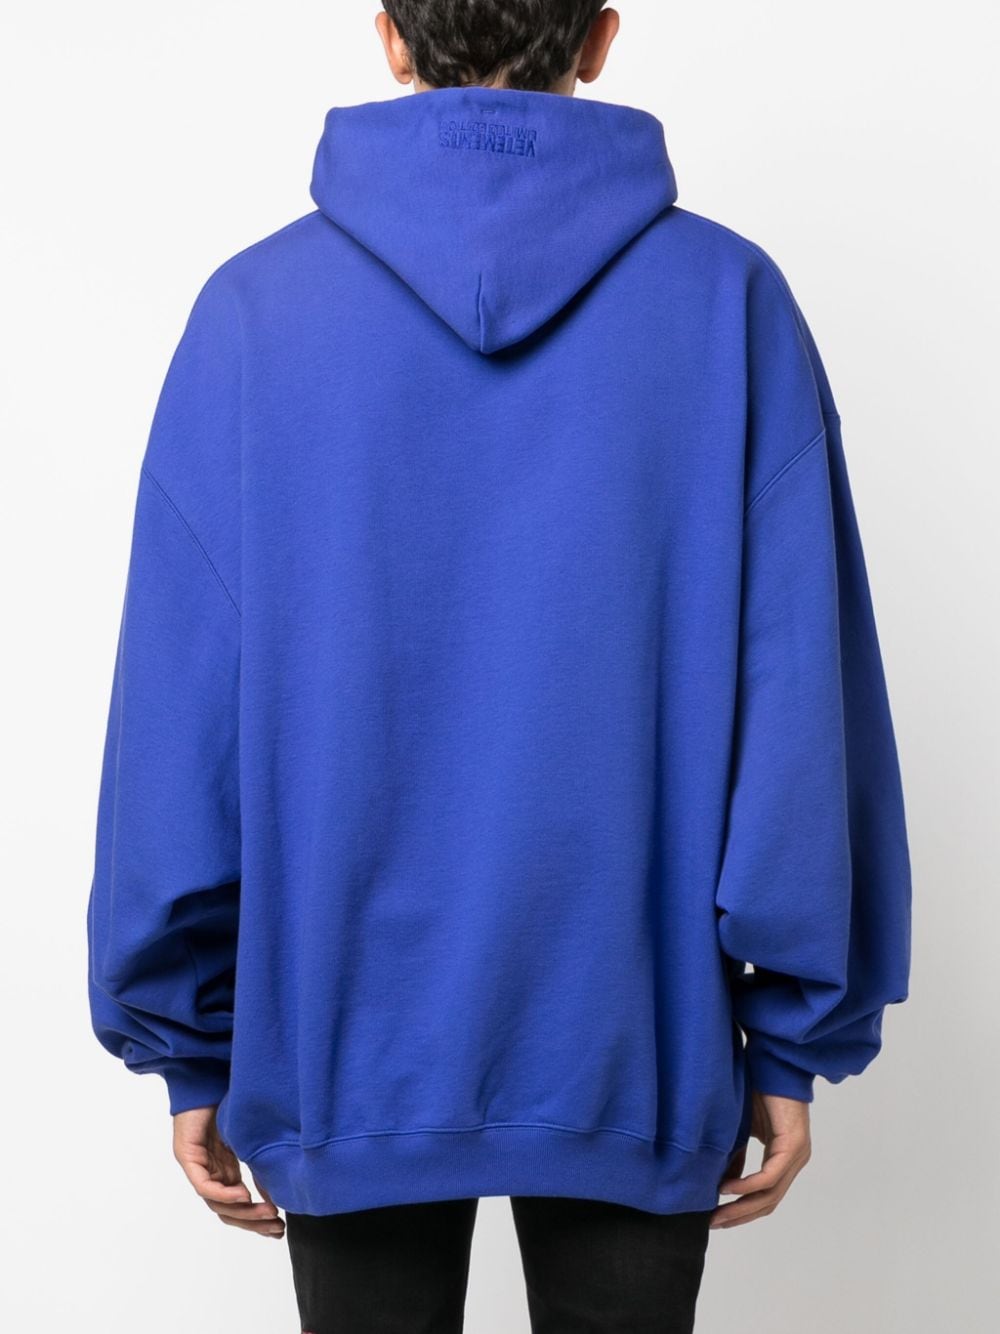 royal blue hoodie with logo